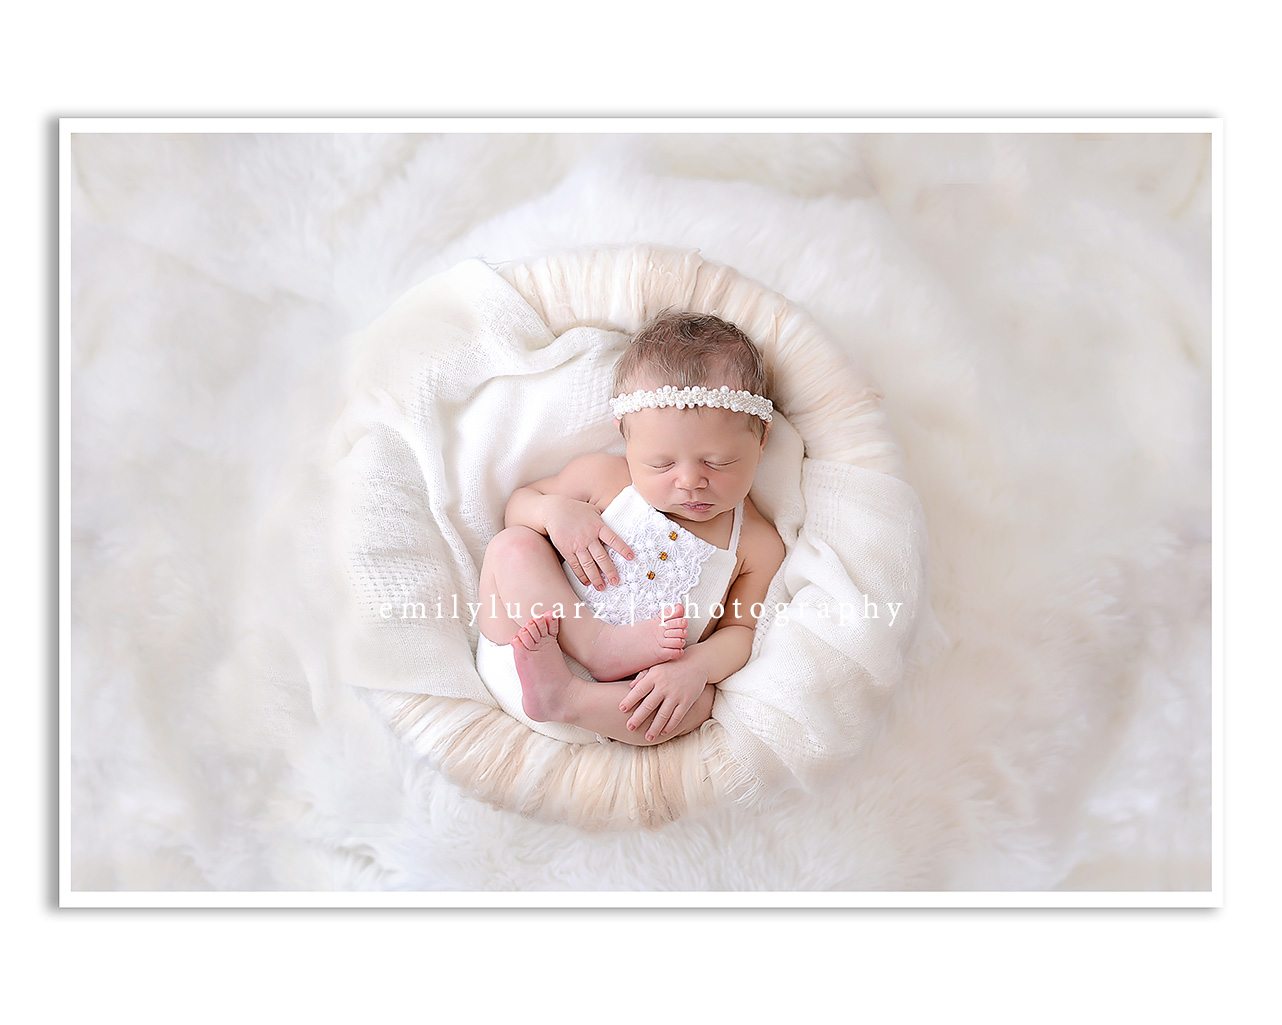 chesterfield and st louis area newborn photography natural light